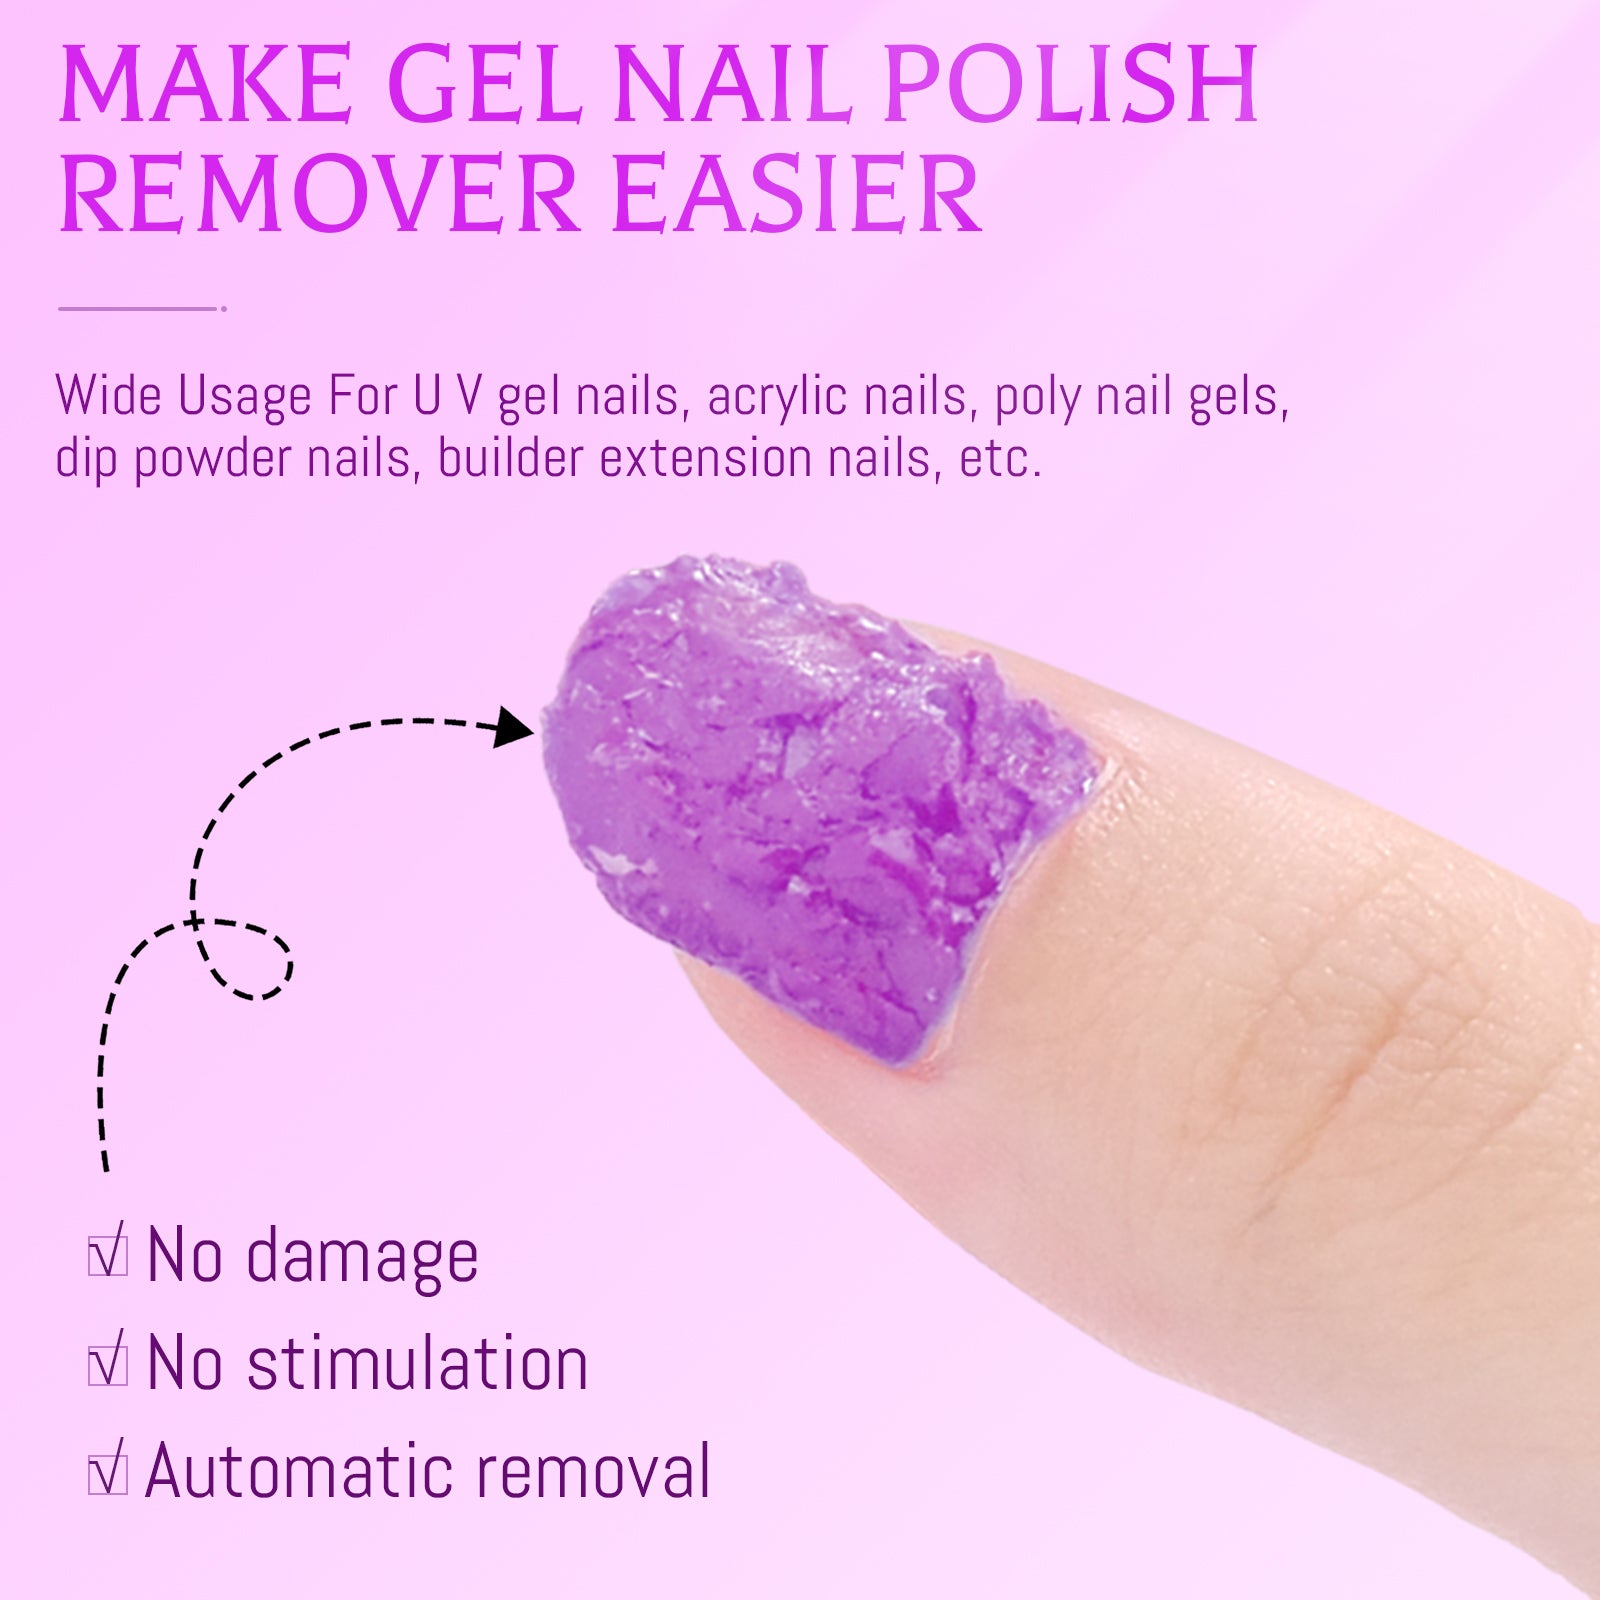 [US ONLY]Gel Nail Polish Remover Kit